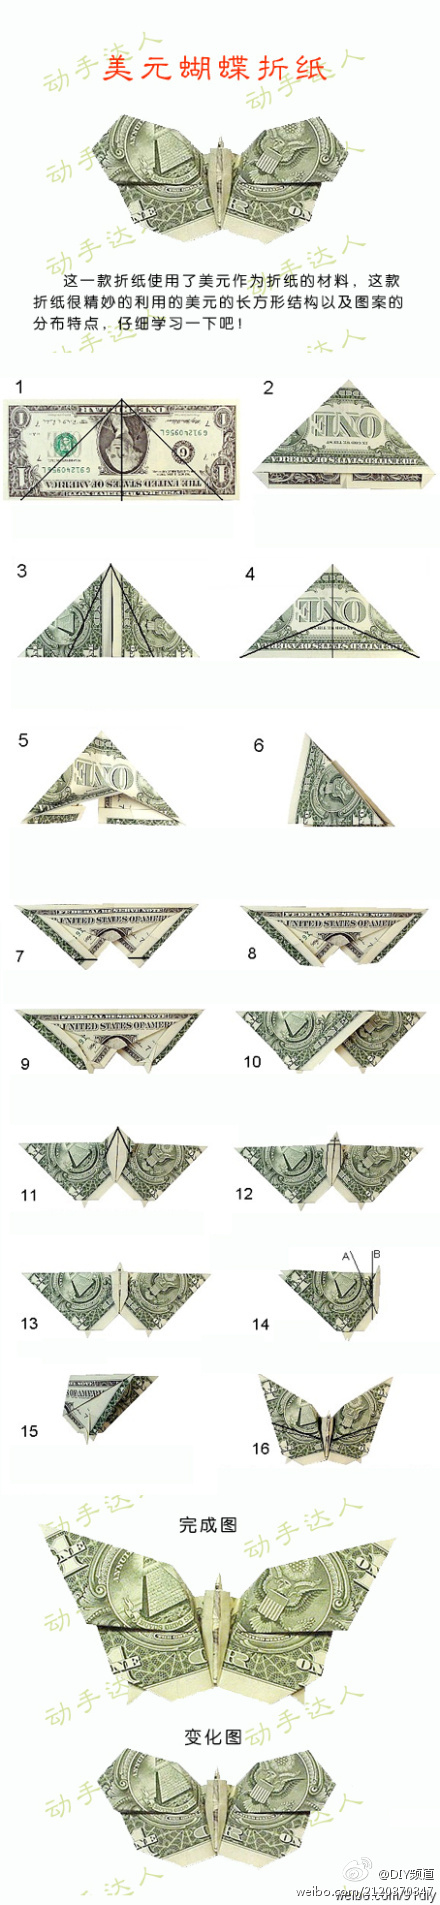 How To Fold Origami Butterfly Origami Dollar Bill Butterfly Folding Instructions Origami Instruction